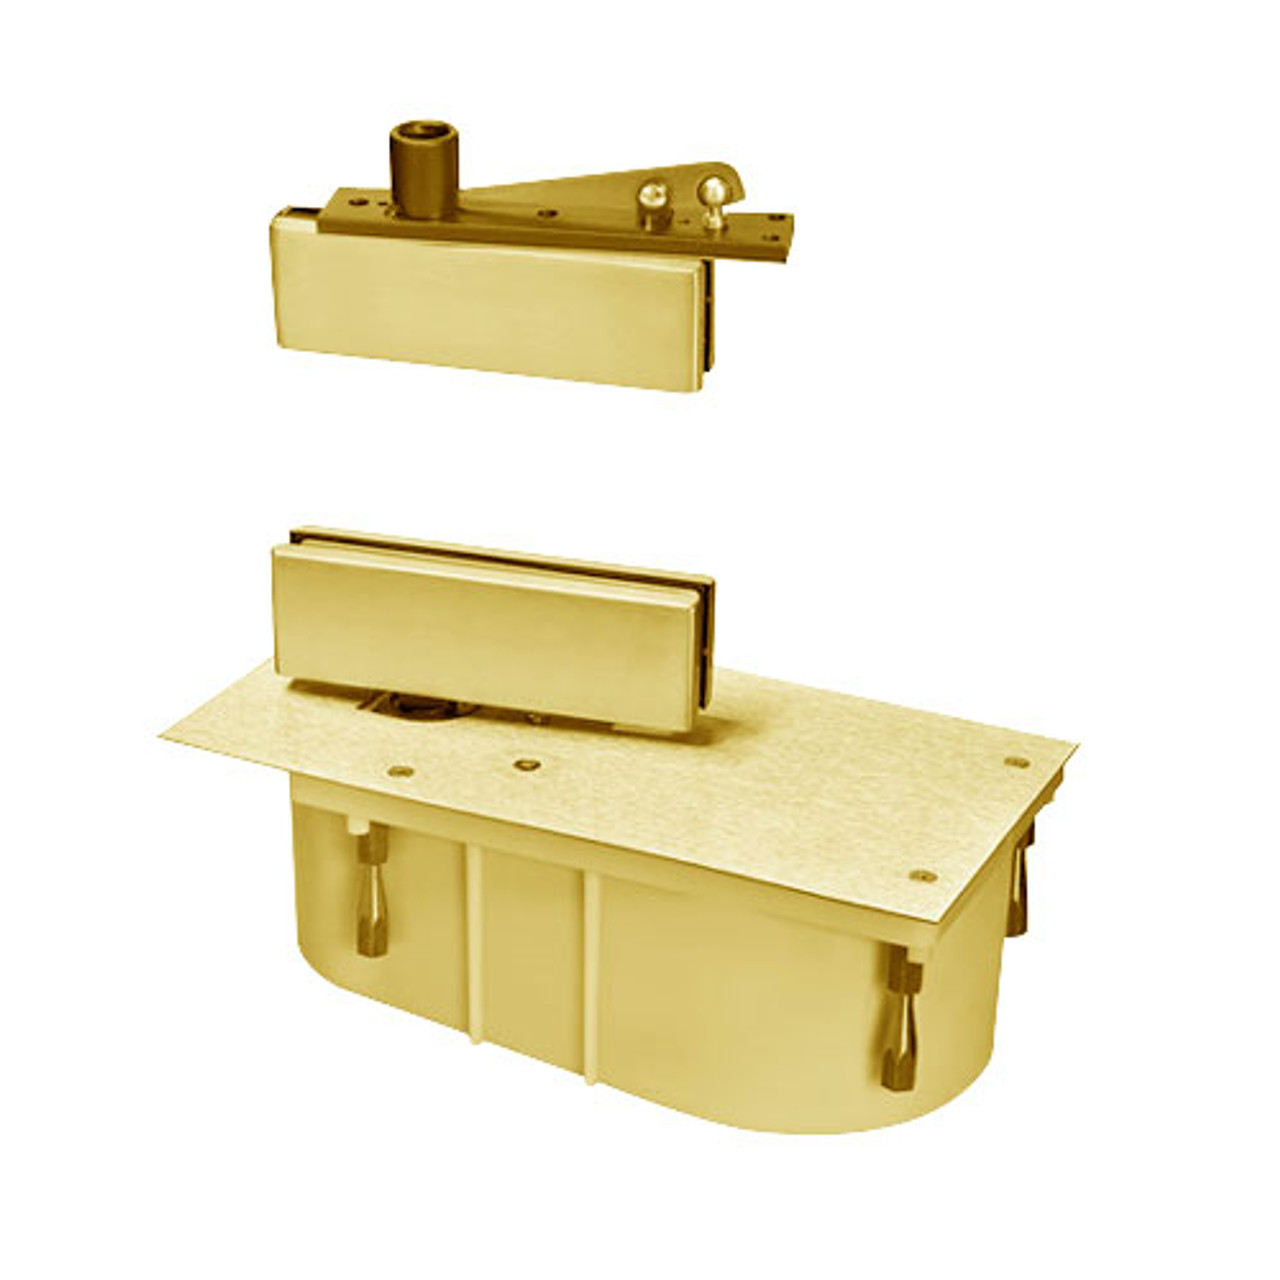 428-90N-CWF-LH-605 Rixson 428 Series Heavy Duty Single Acting Center Hung Floor Closer with Patch Fittings in Bright Brass Finish